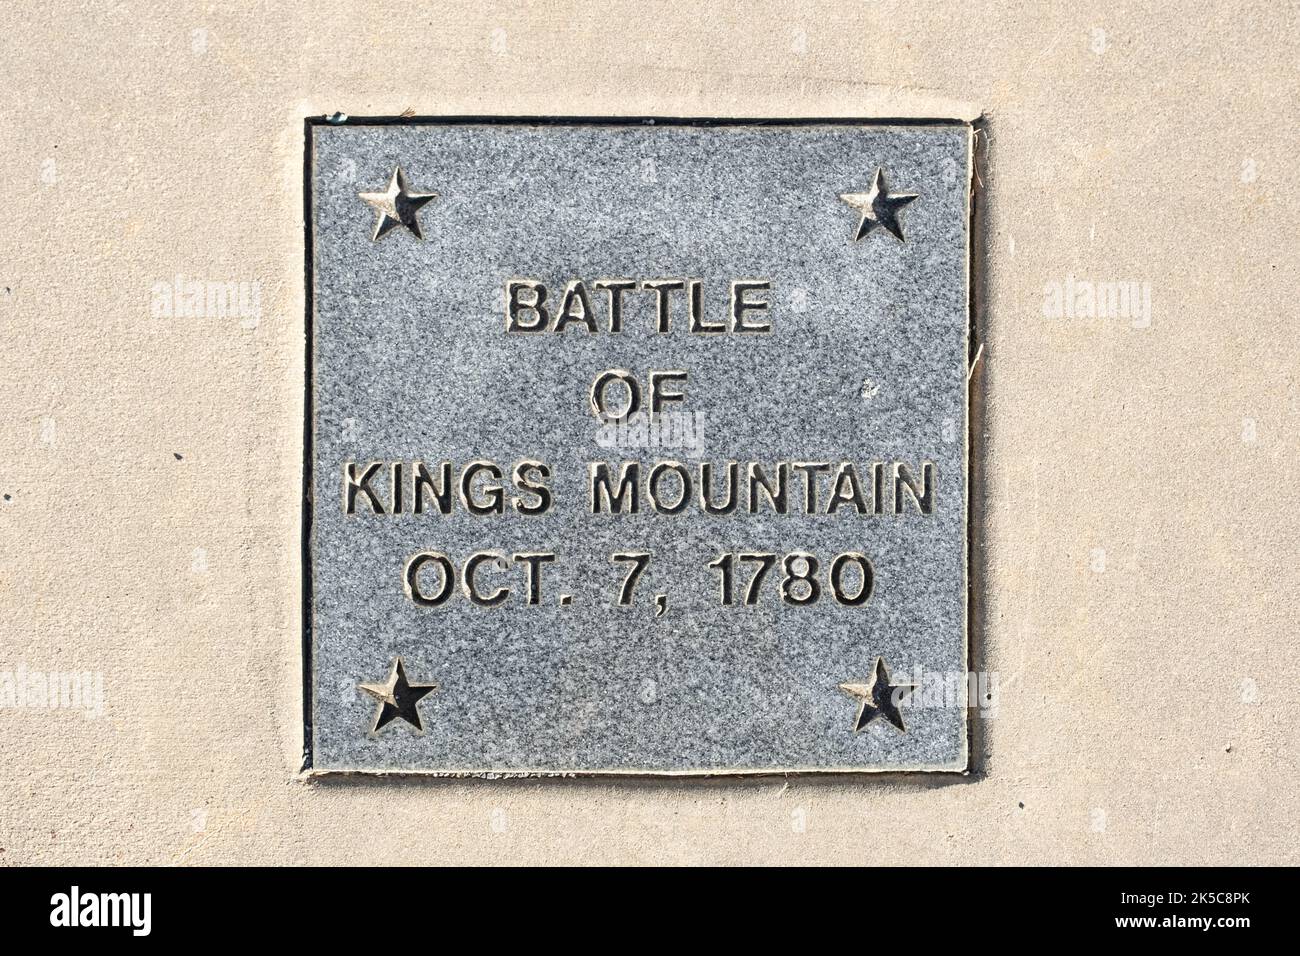 Metal plaque marking the Battle of Kings Mountain on Oct. 7, 1780 Stock Photo